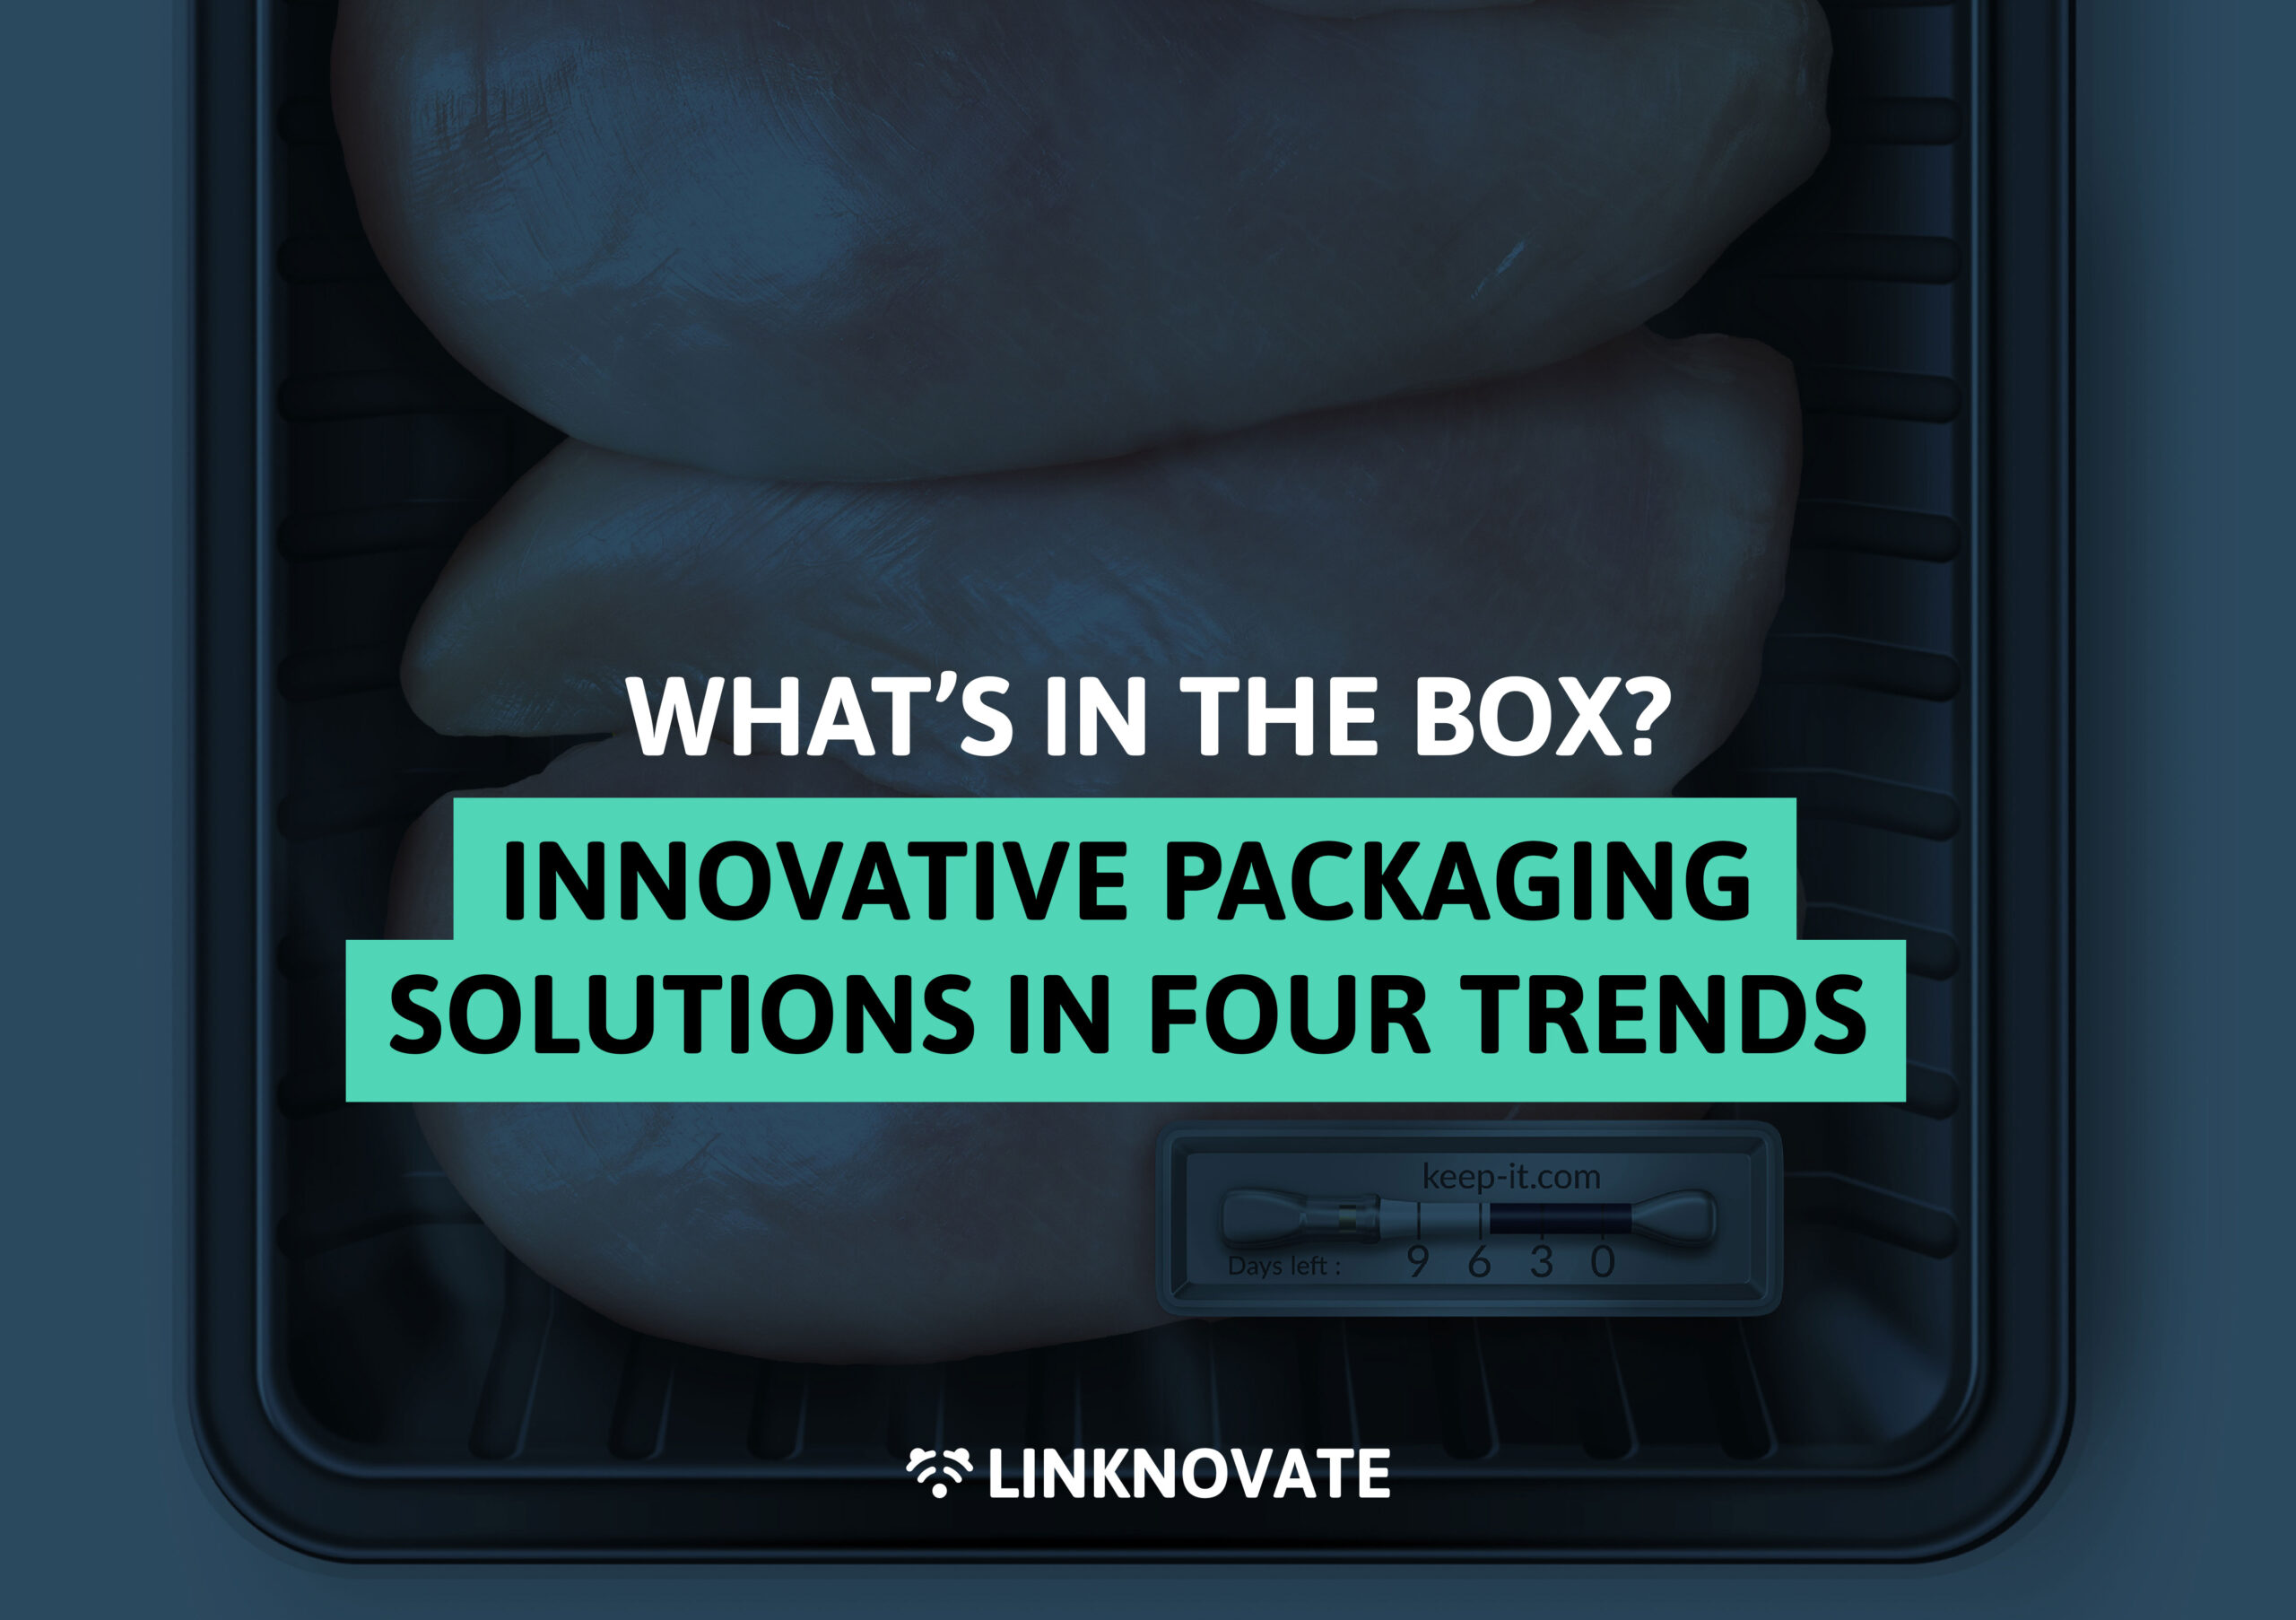 What's in the box? Innovative packaging solutions in four trends